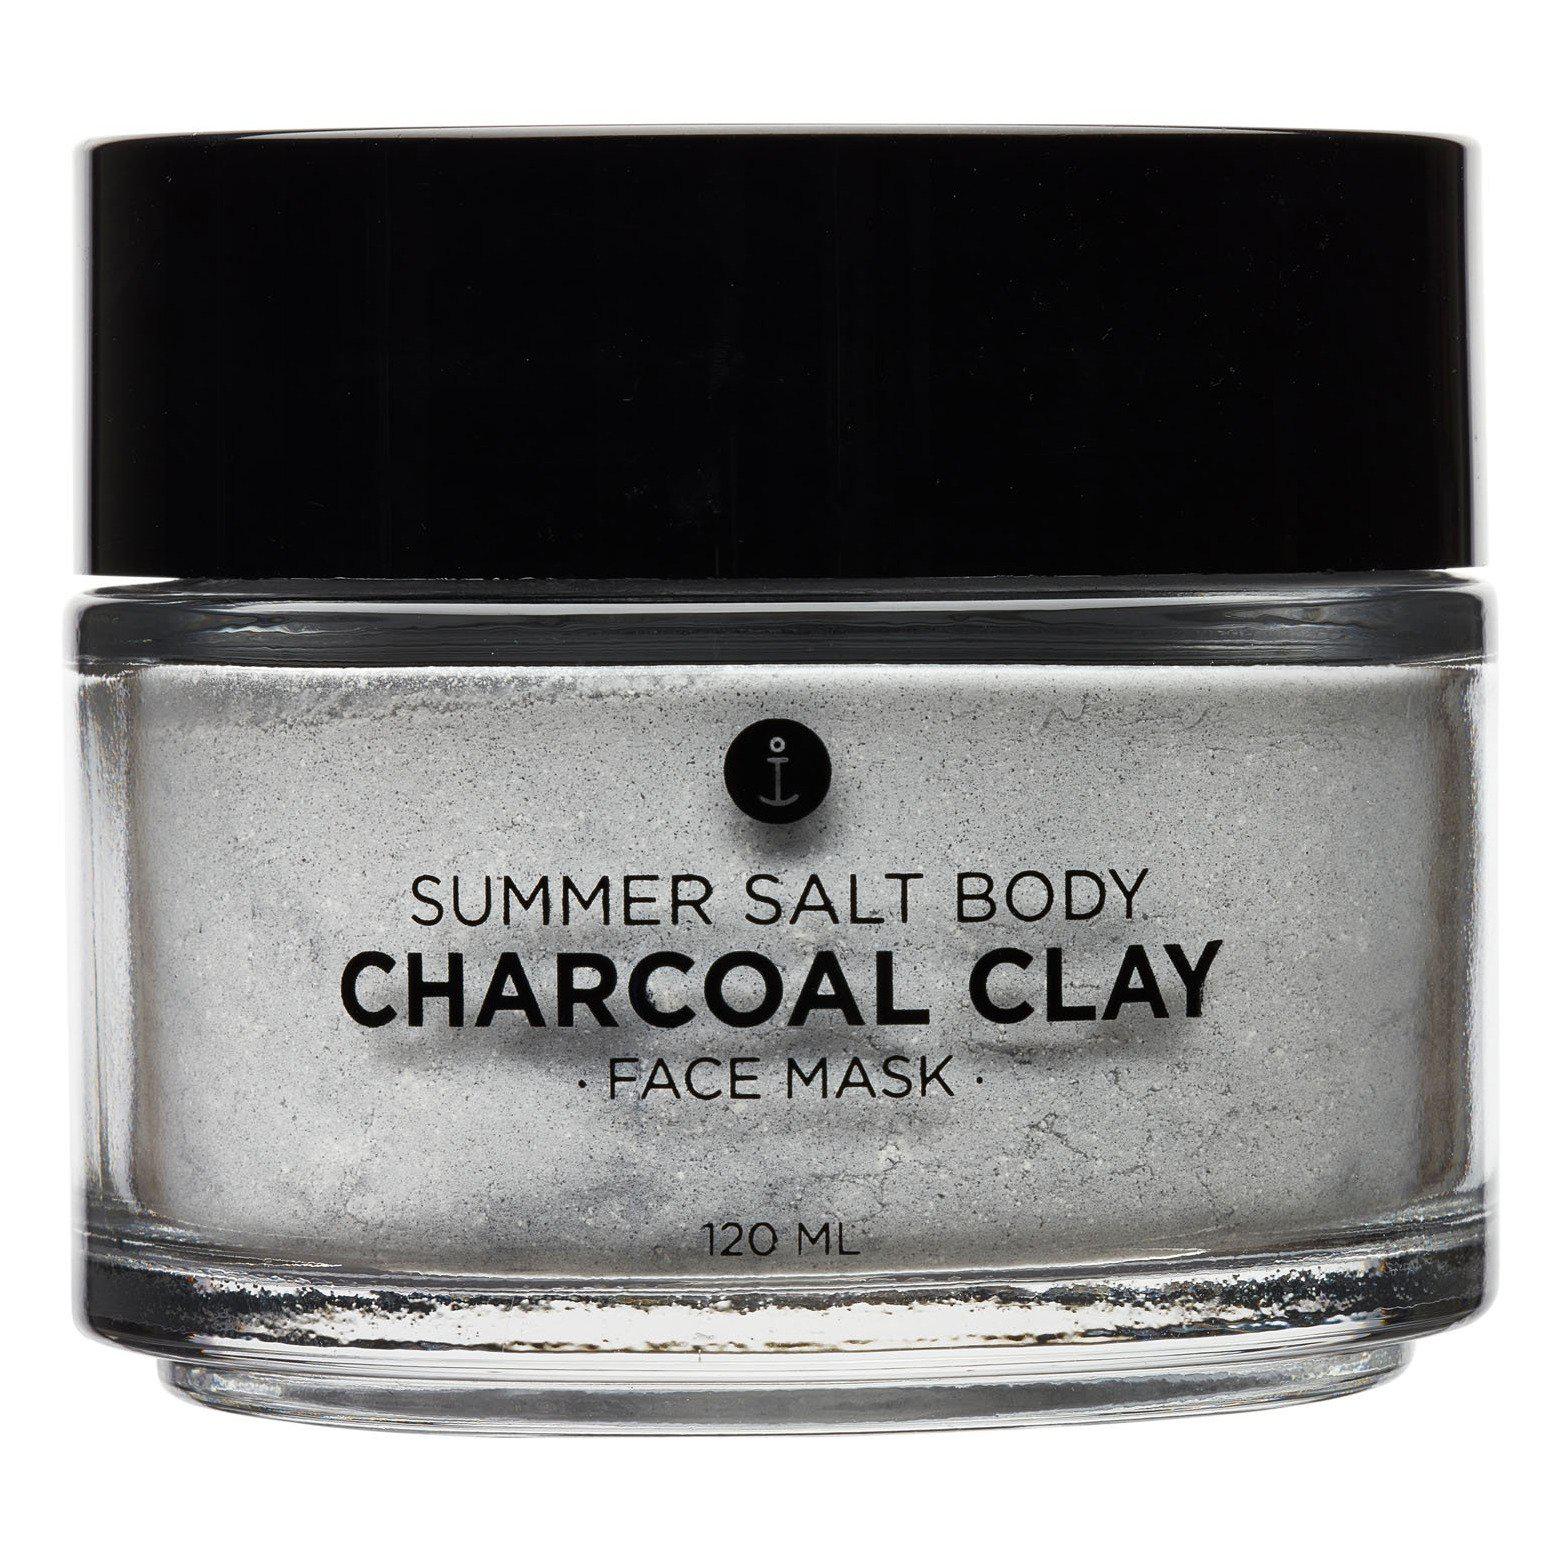 Activated Charcoal Clay Mask - 120ml-Beauty & Well-Being-Summer Salt Body-The Bay Room